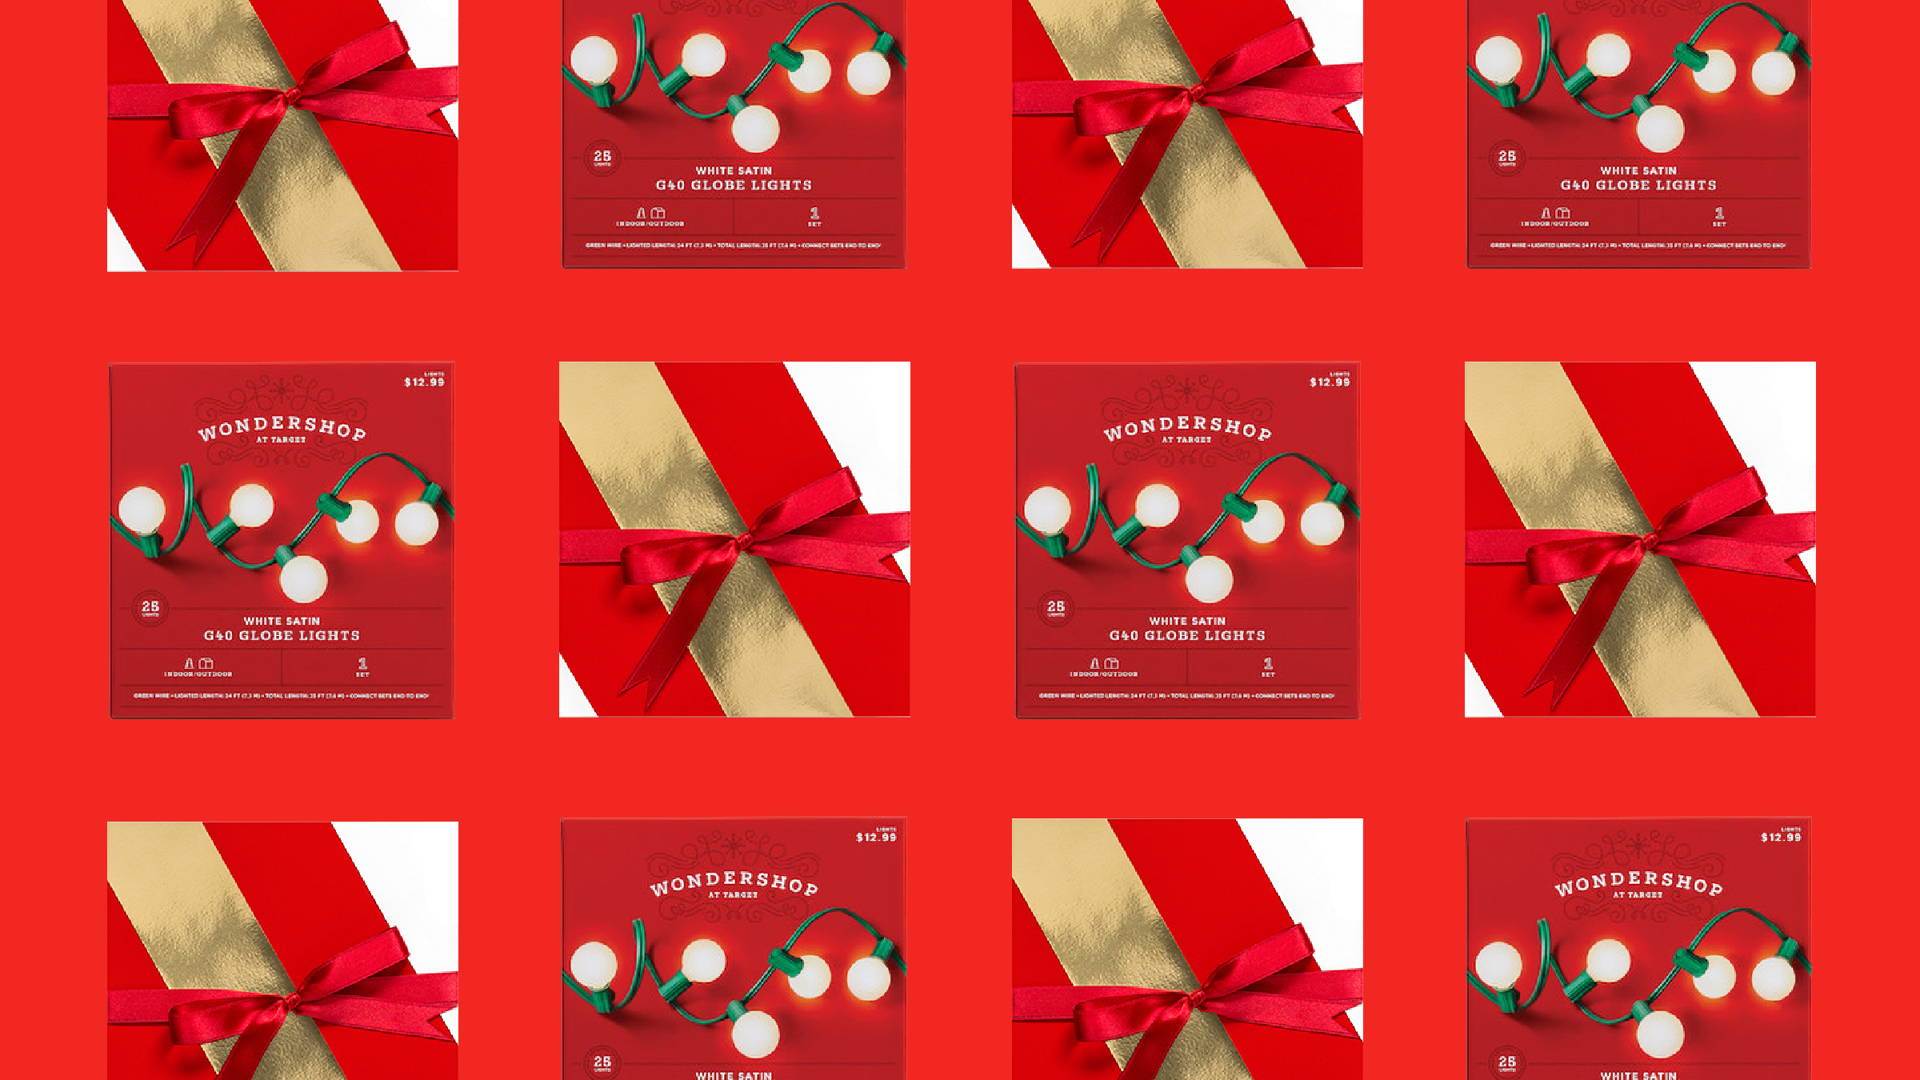 25 Festive Packaging Ideas For Food Gifts This Holiday